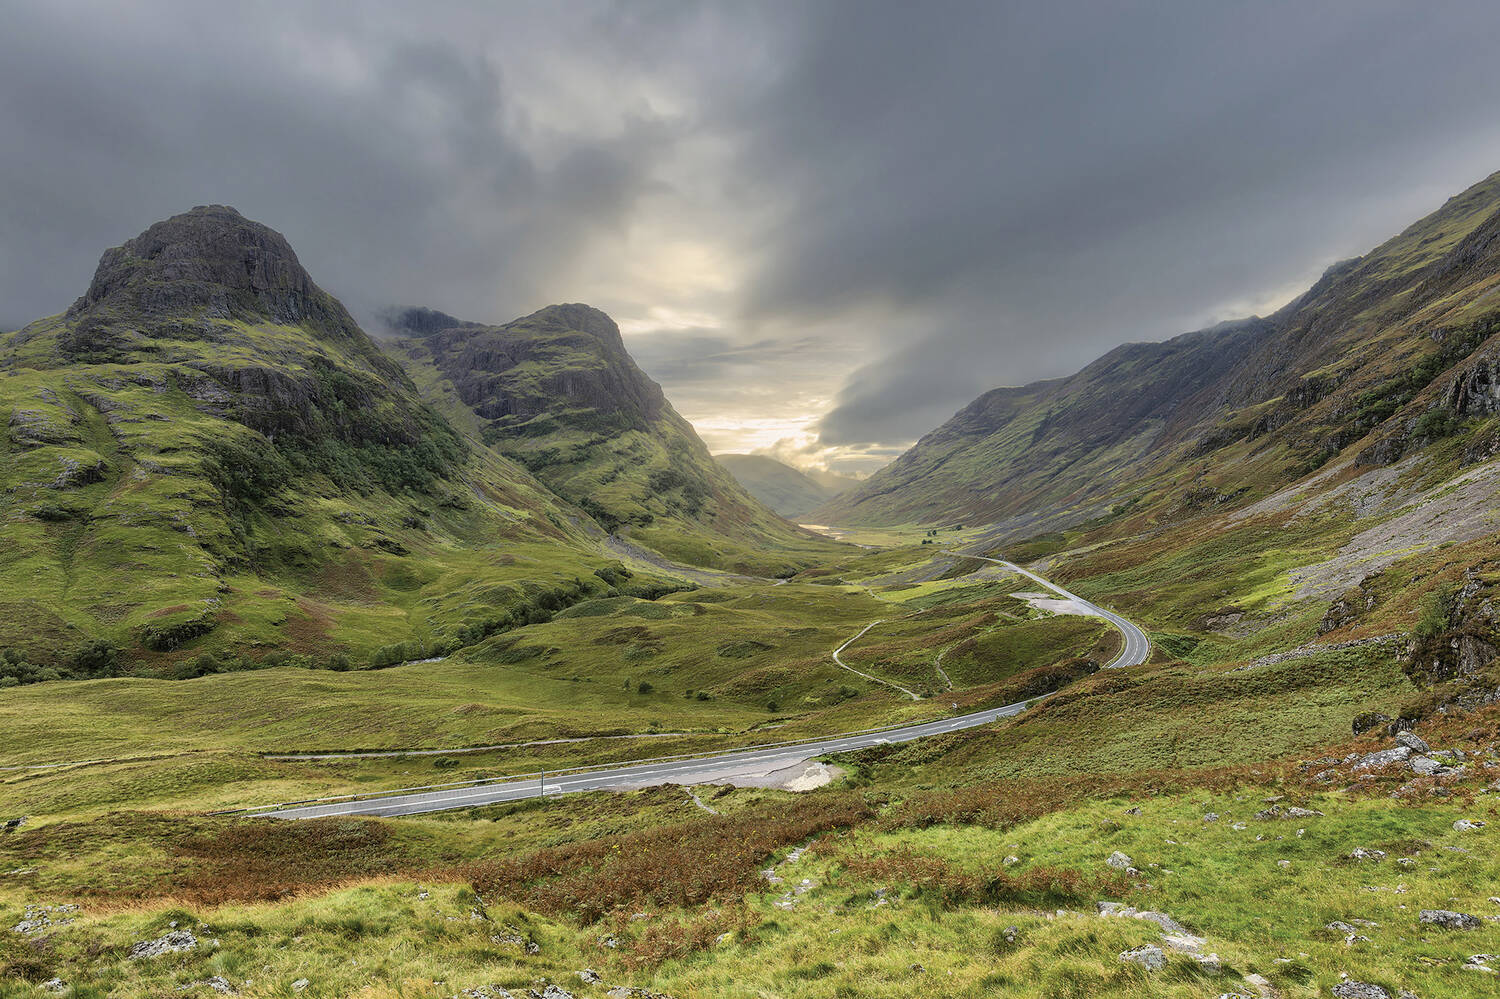 Mountainous landscape at Glencoe with stormy skies